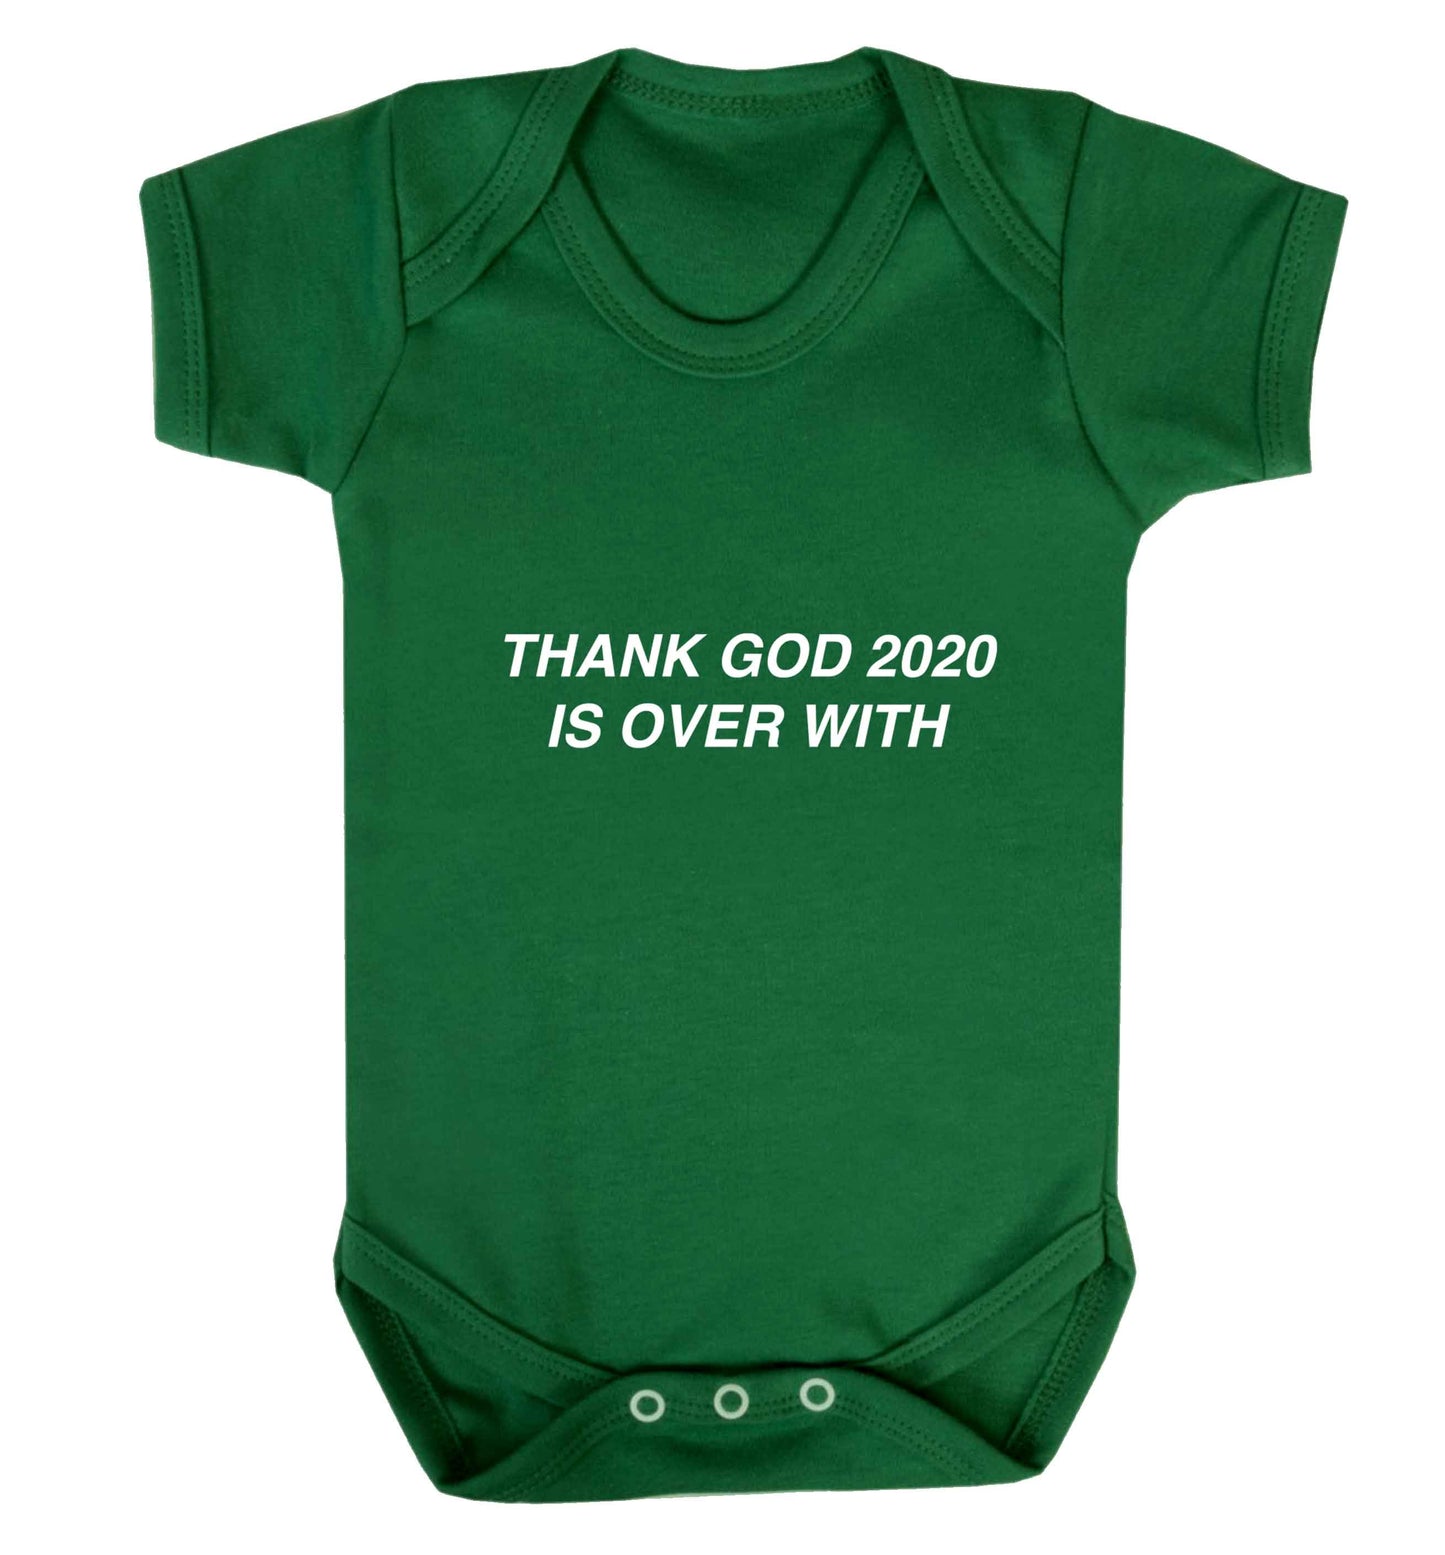 Thank god 2020 is over with baby vest green 18-24 months